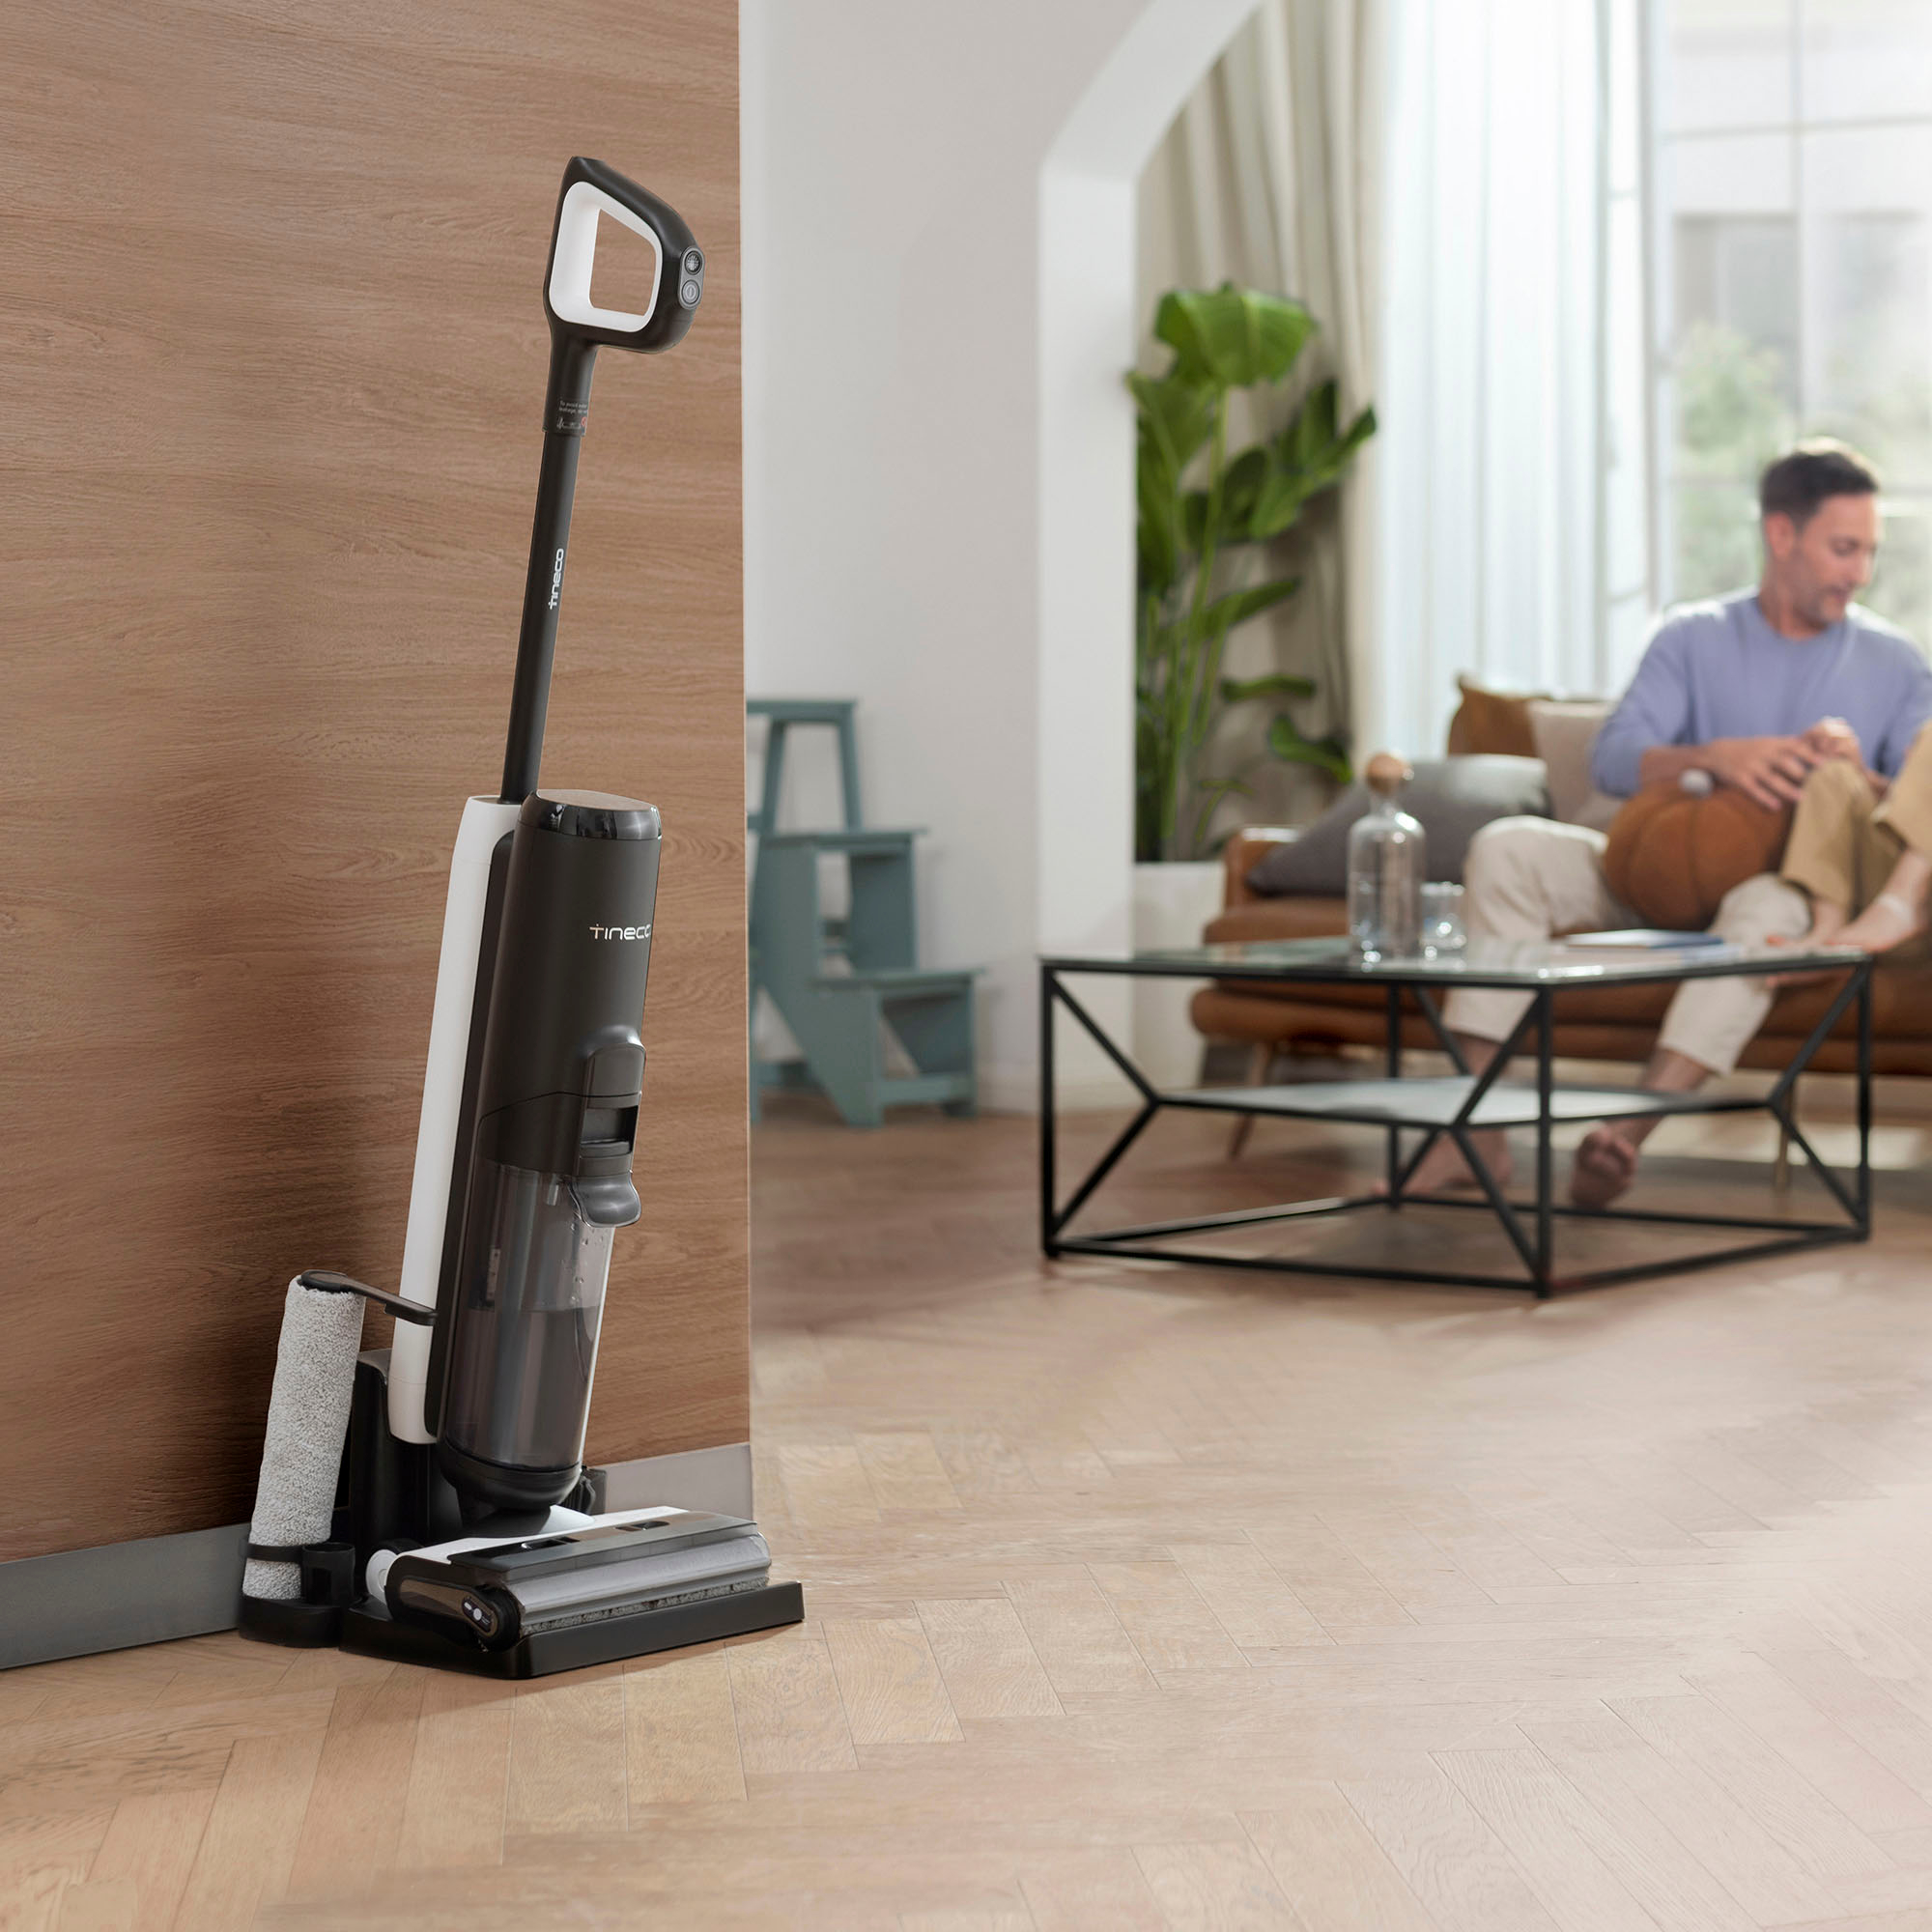 Tineco Floor One S5 Extreme – 3 in 1 Mop, Vacuum & Self Cleaning